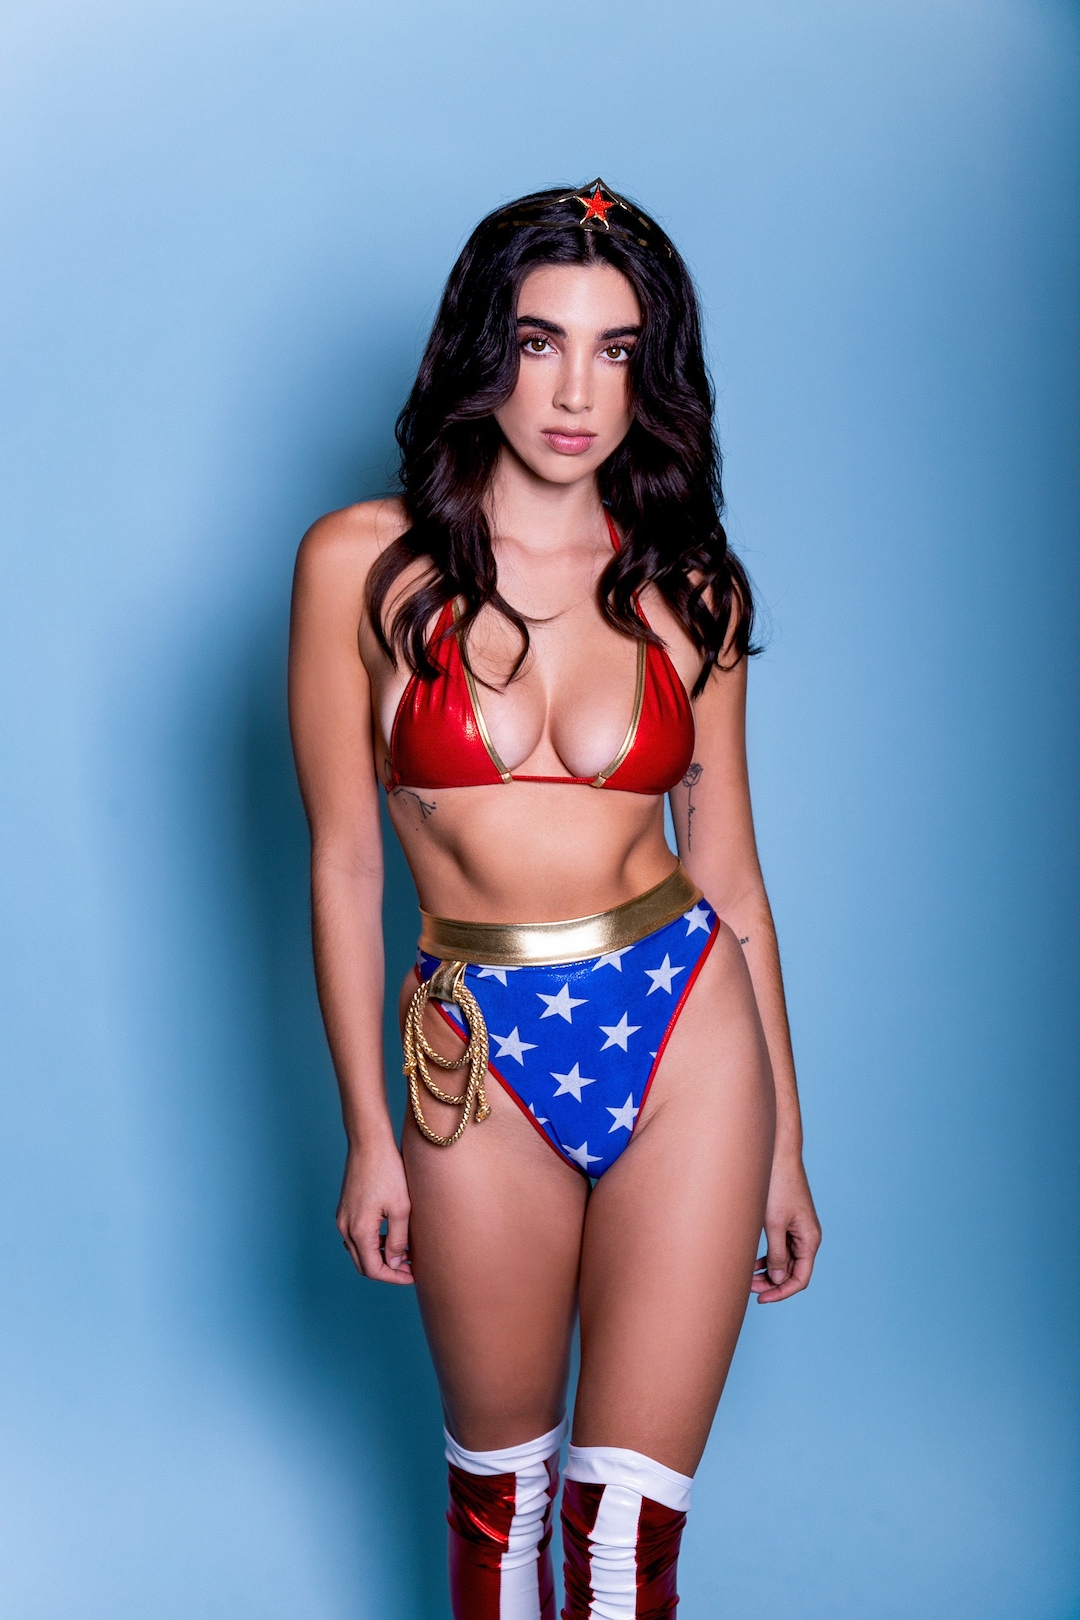 Sexy Lingerie, Wonder Woman Costume, Halloween Dress, Cosplay : :  Clothing, Shoes & Accessories